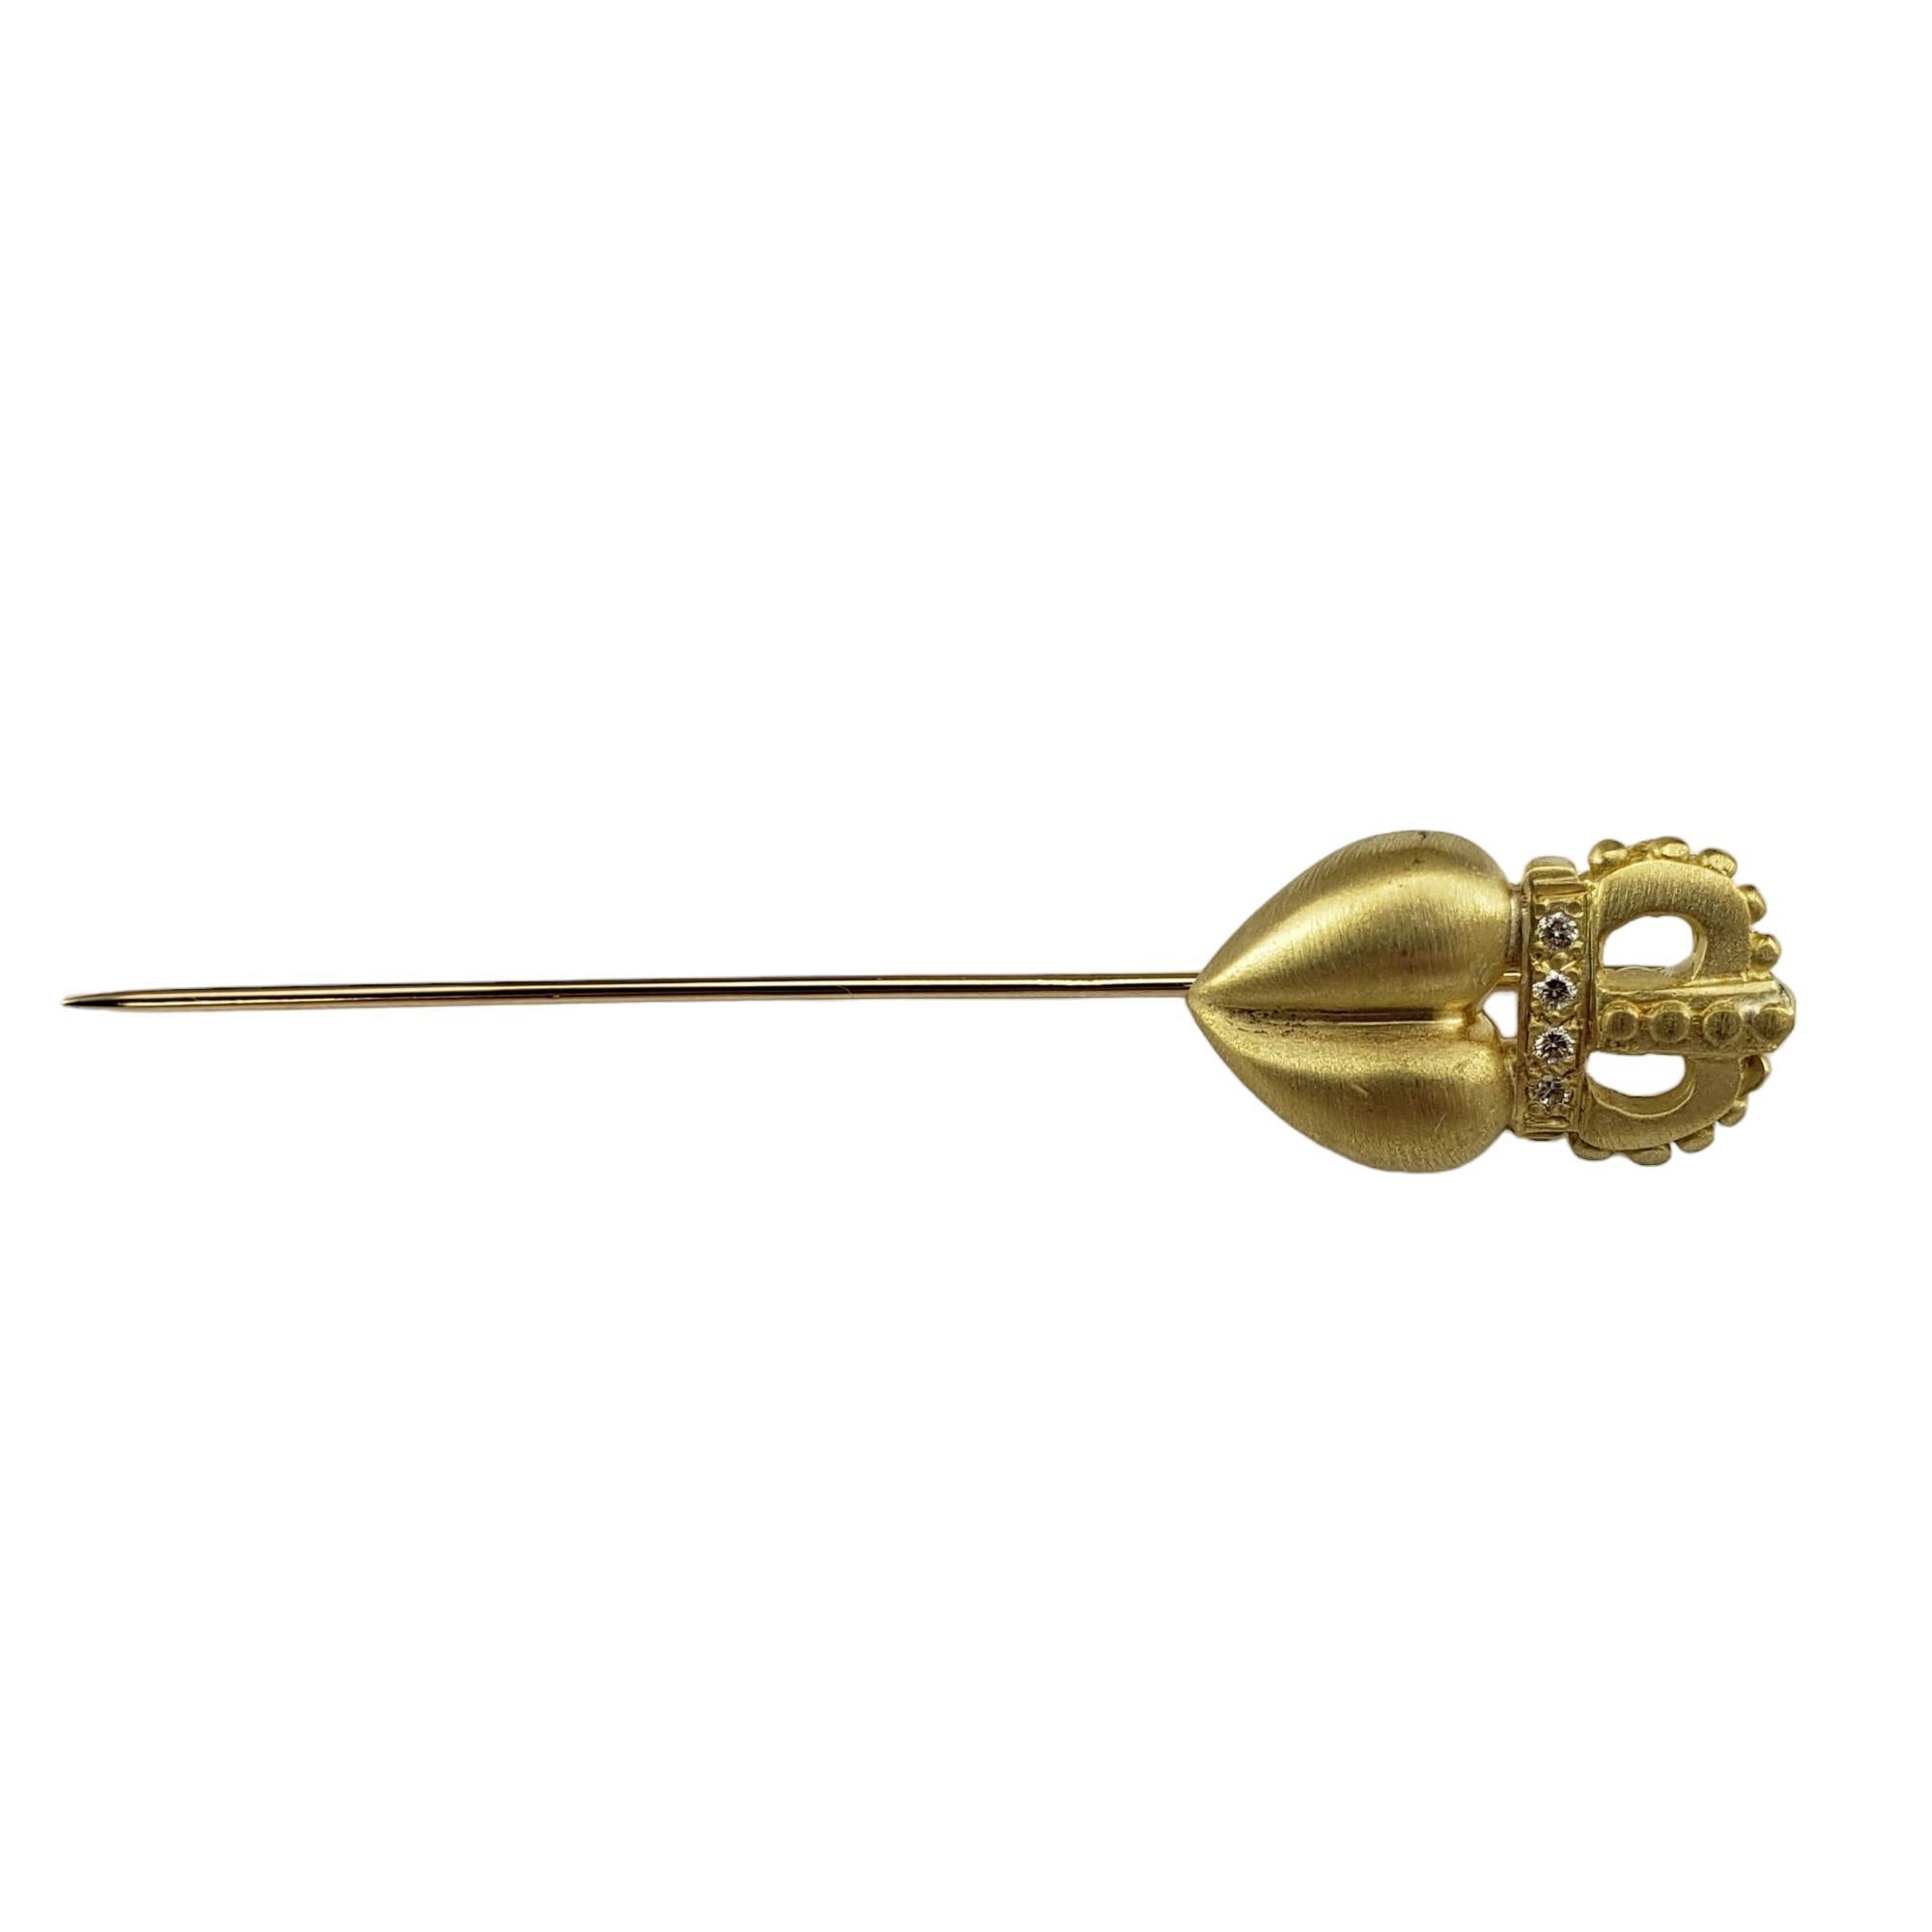 Brilliant Cut Penny Preville 18K Yellow Gold and Diamond Claddagh Stick Pin #17106